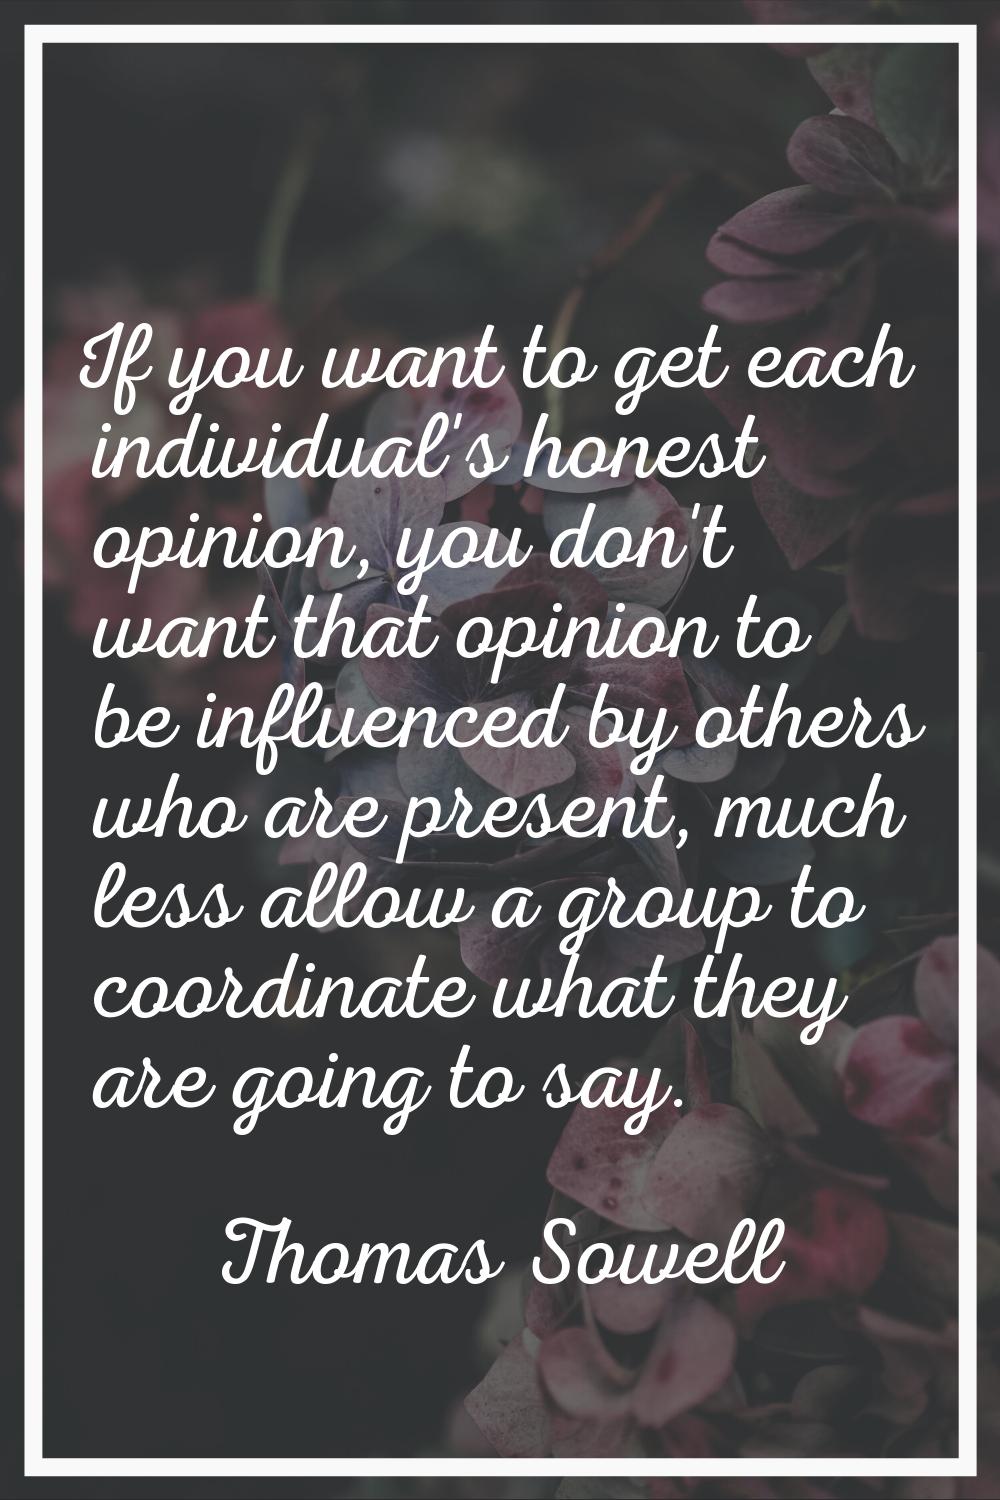 If you want to get each individual's honest opinion, you don't want that opinion to be influenced b